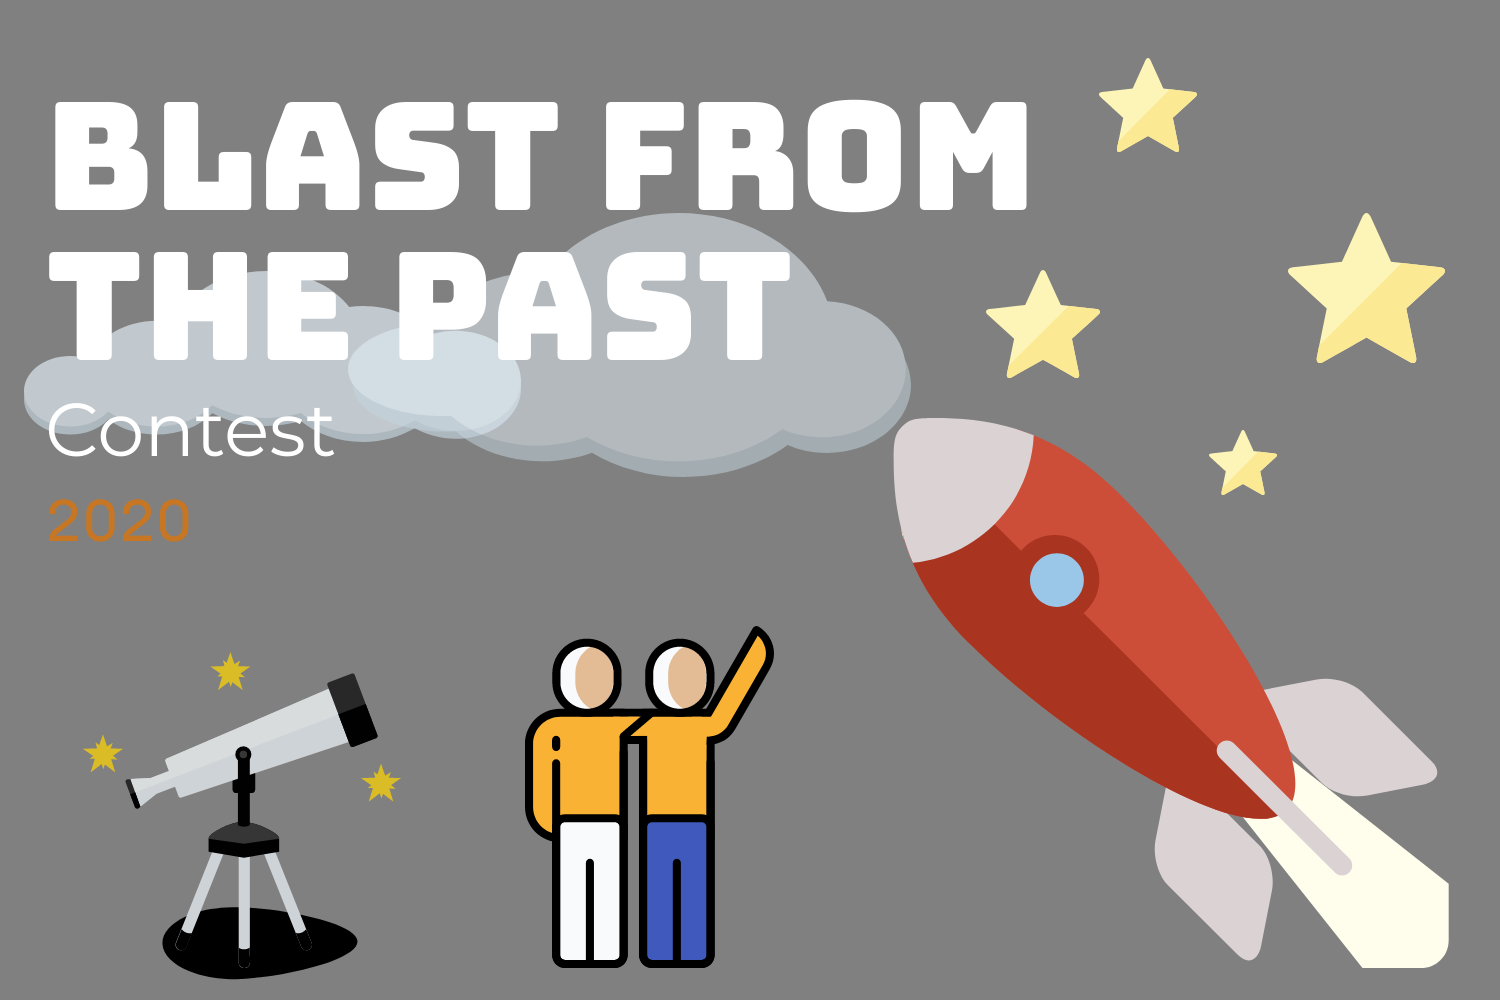 2020 Blast from the past contest